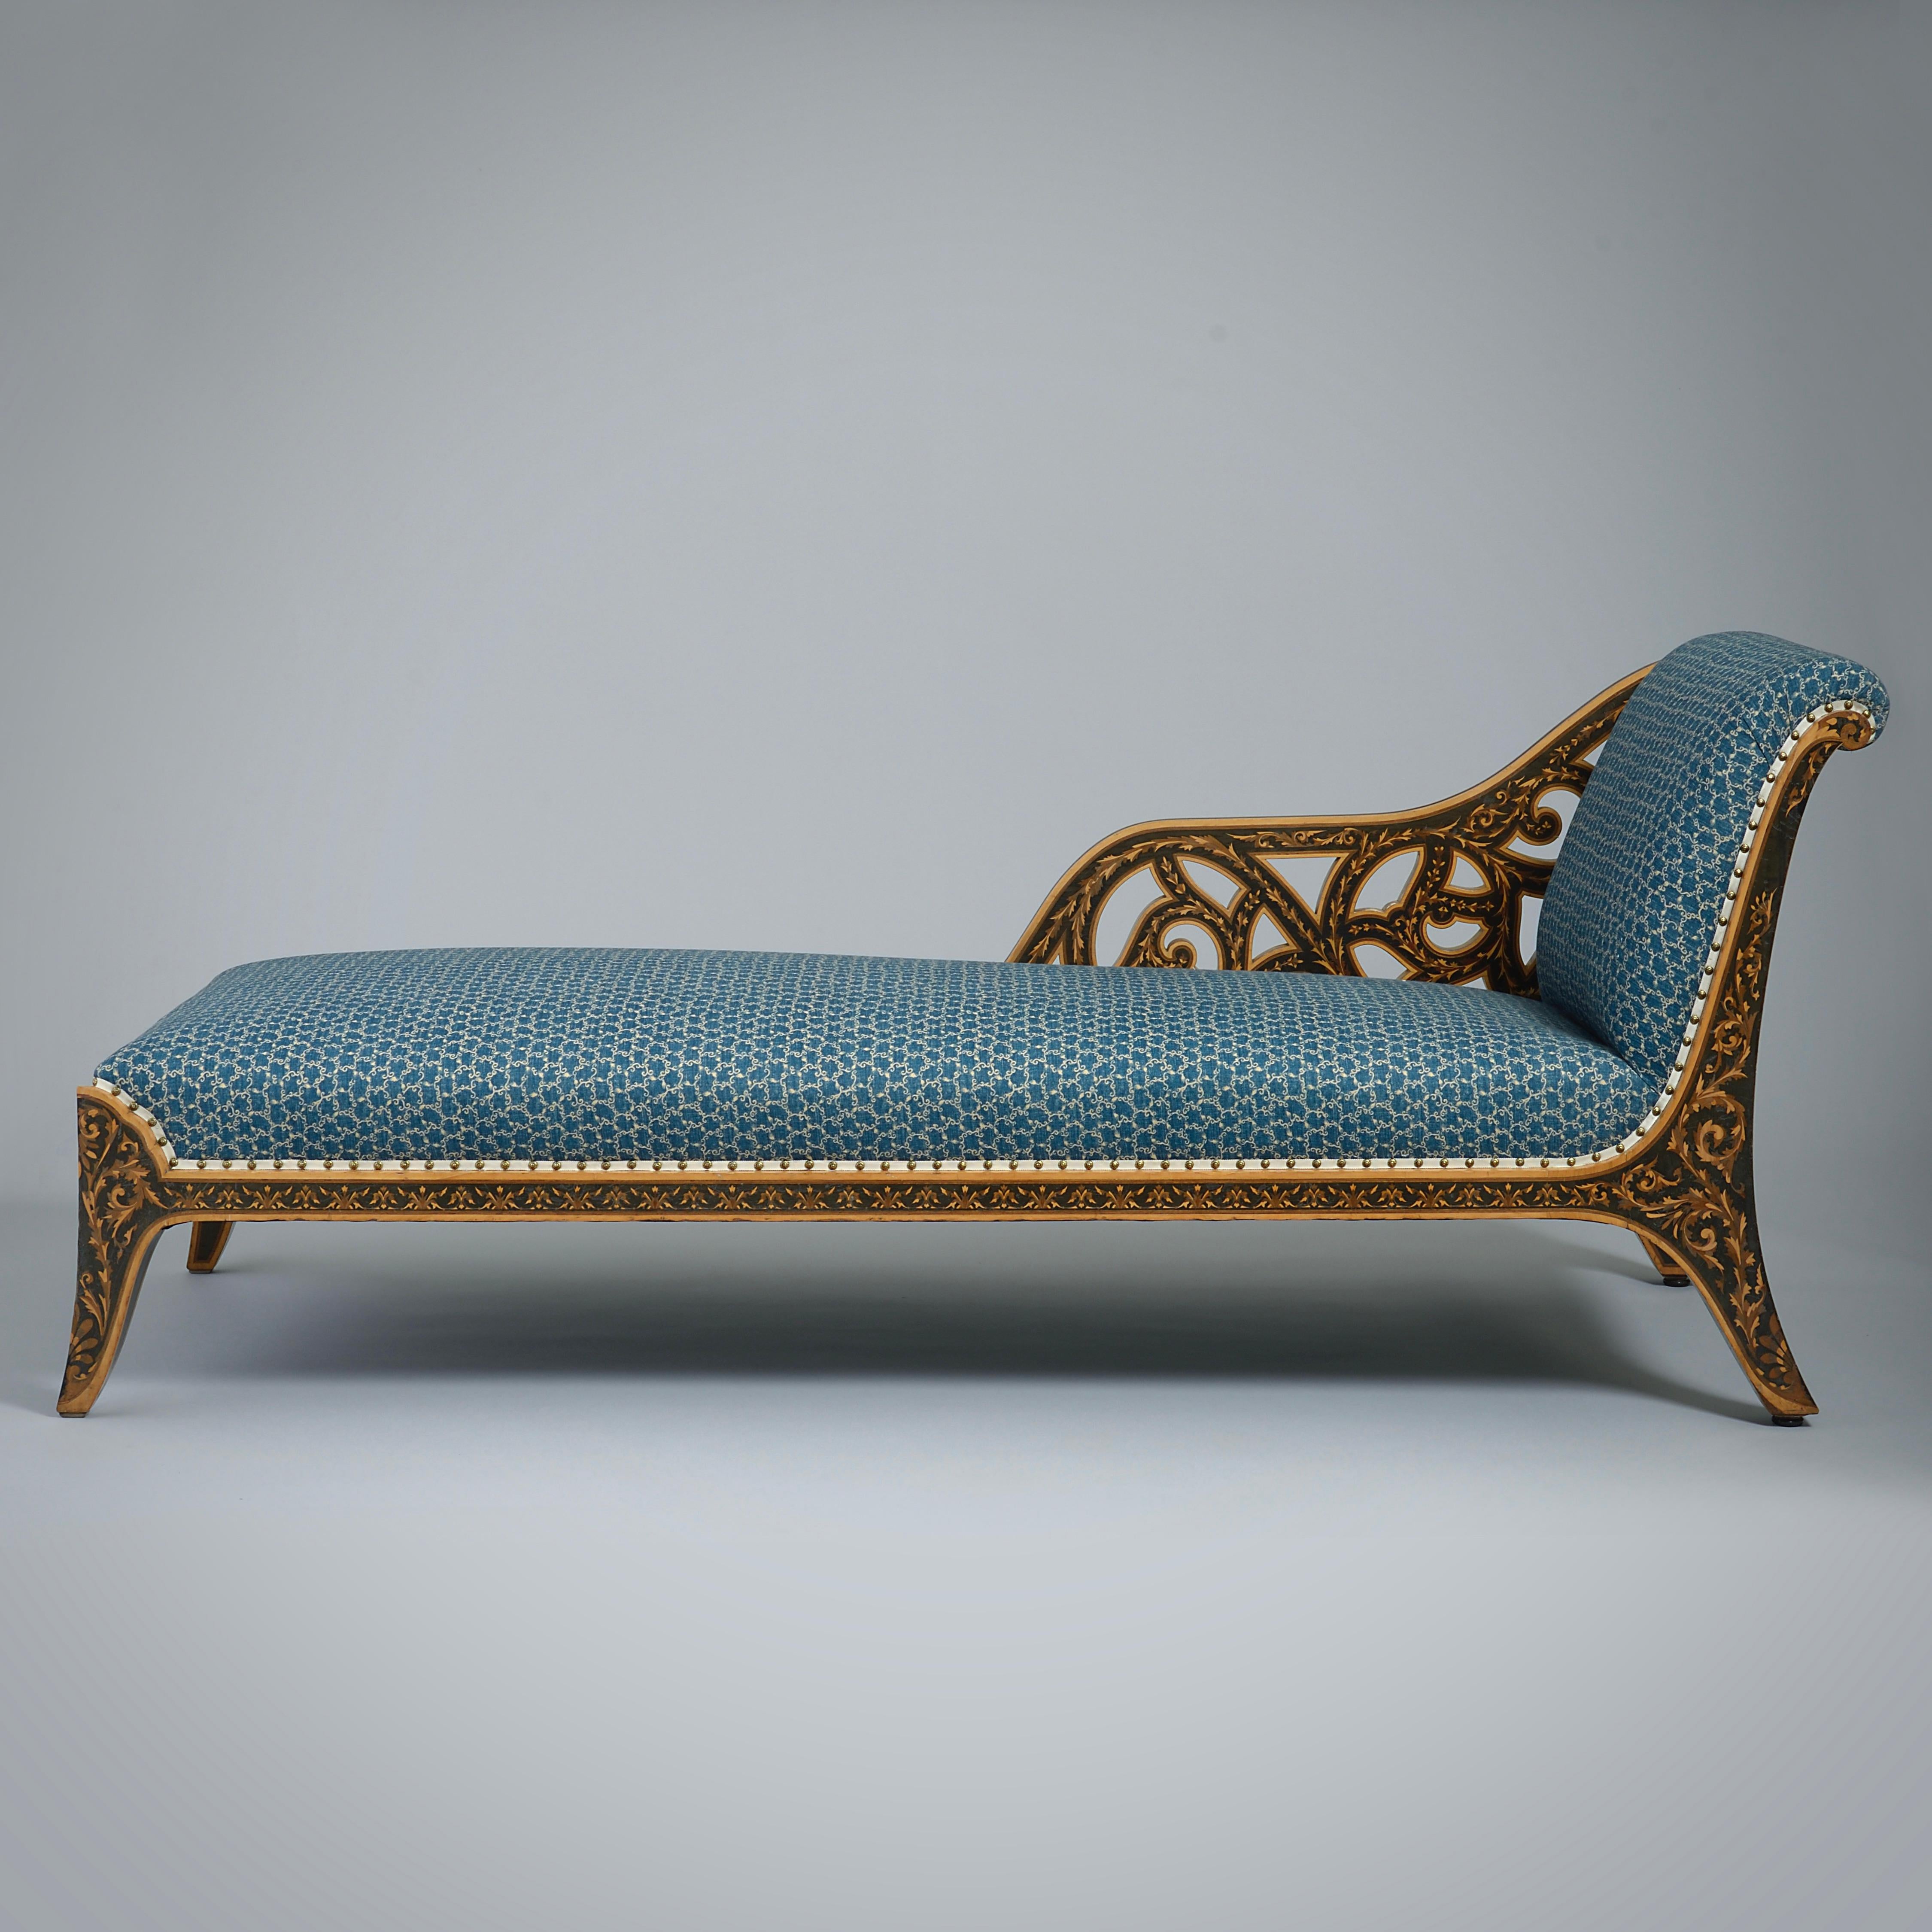 A marquetry and ebony chaise Longue designed by Owen Jones (1809-1874) and manufactured by Jackson & Graham, circa 1867-70.
Inlaid with holly, purpleheart and harewood on an ebony ground.

Provenance
Made for Alfred Morrison, 16 Carlton House